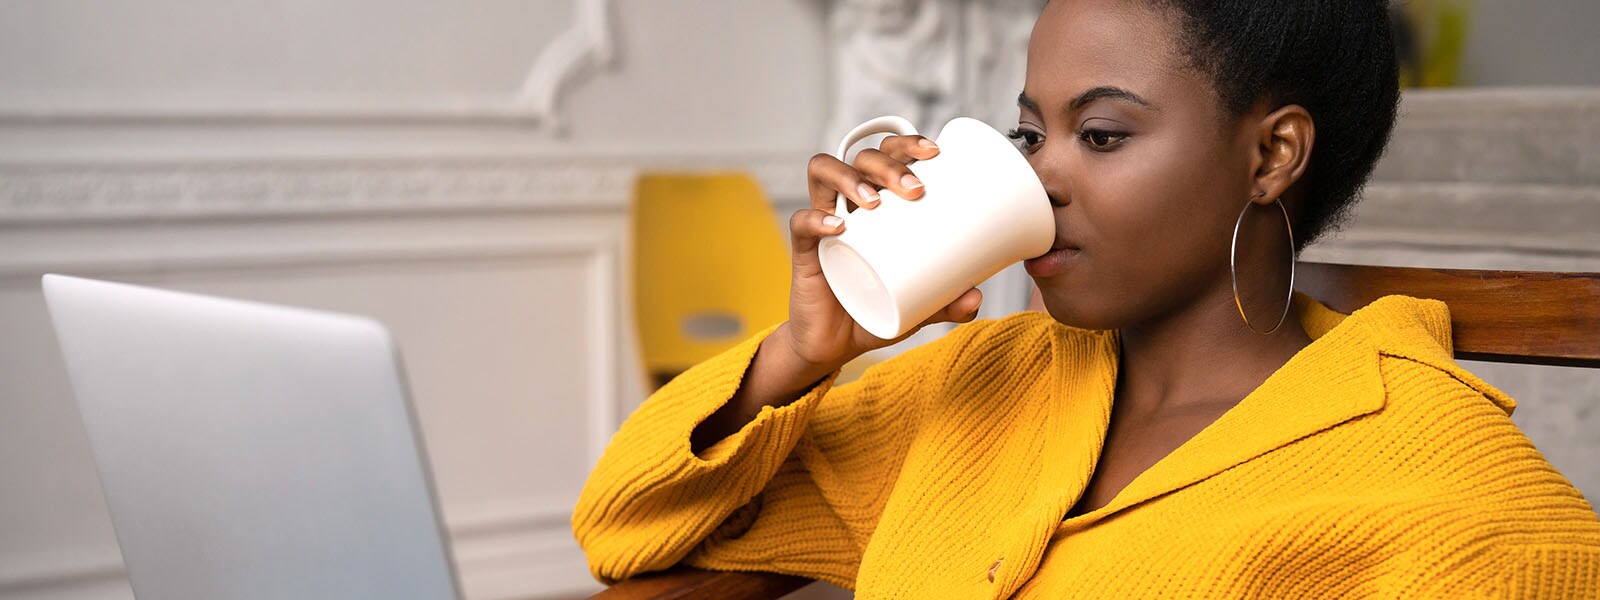 An Black woman researches ways to protect her devices and network from drive-by downloads as she drinks her morning coffee. 